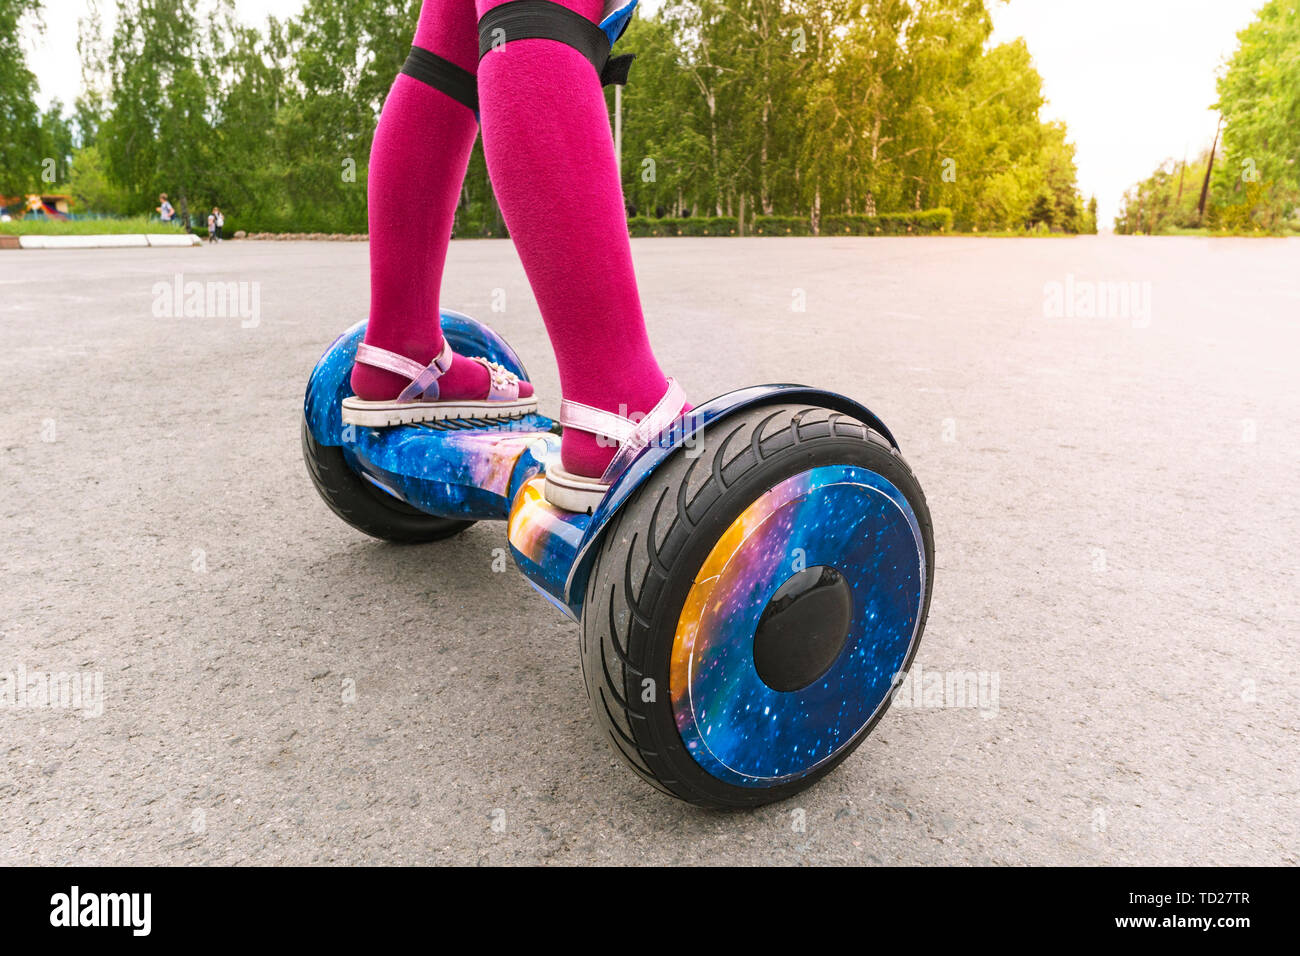 Girl rides on gyroscooter. feet of a little girl in pink pantyhose and sandals are on a GyroScooter Stock Photo